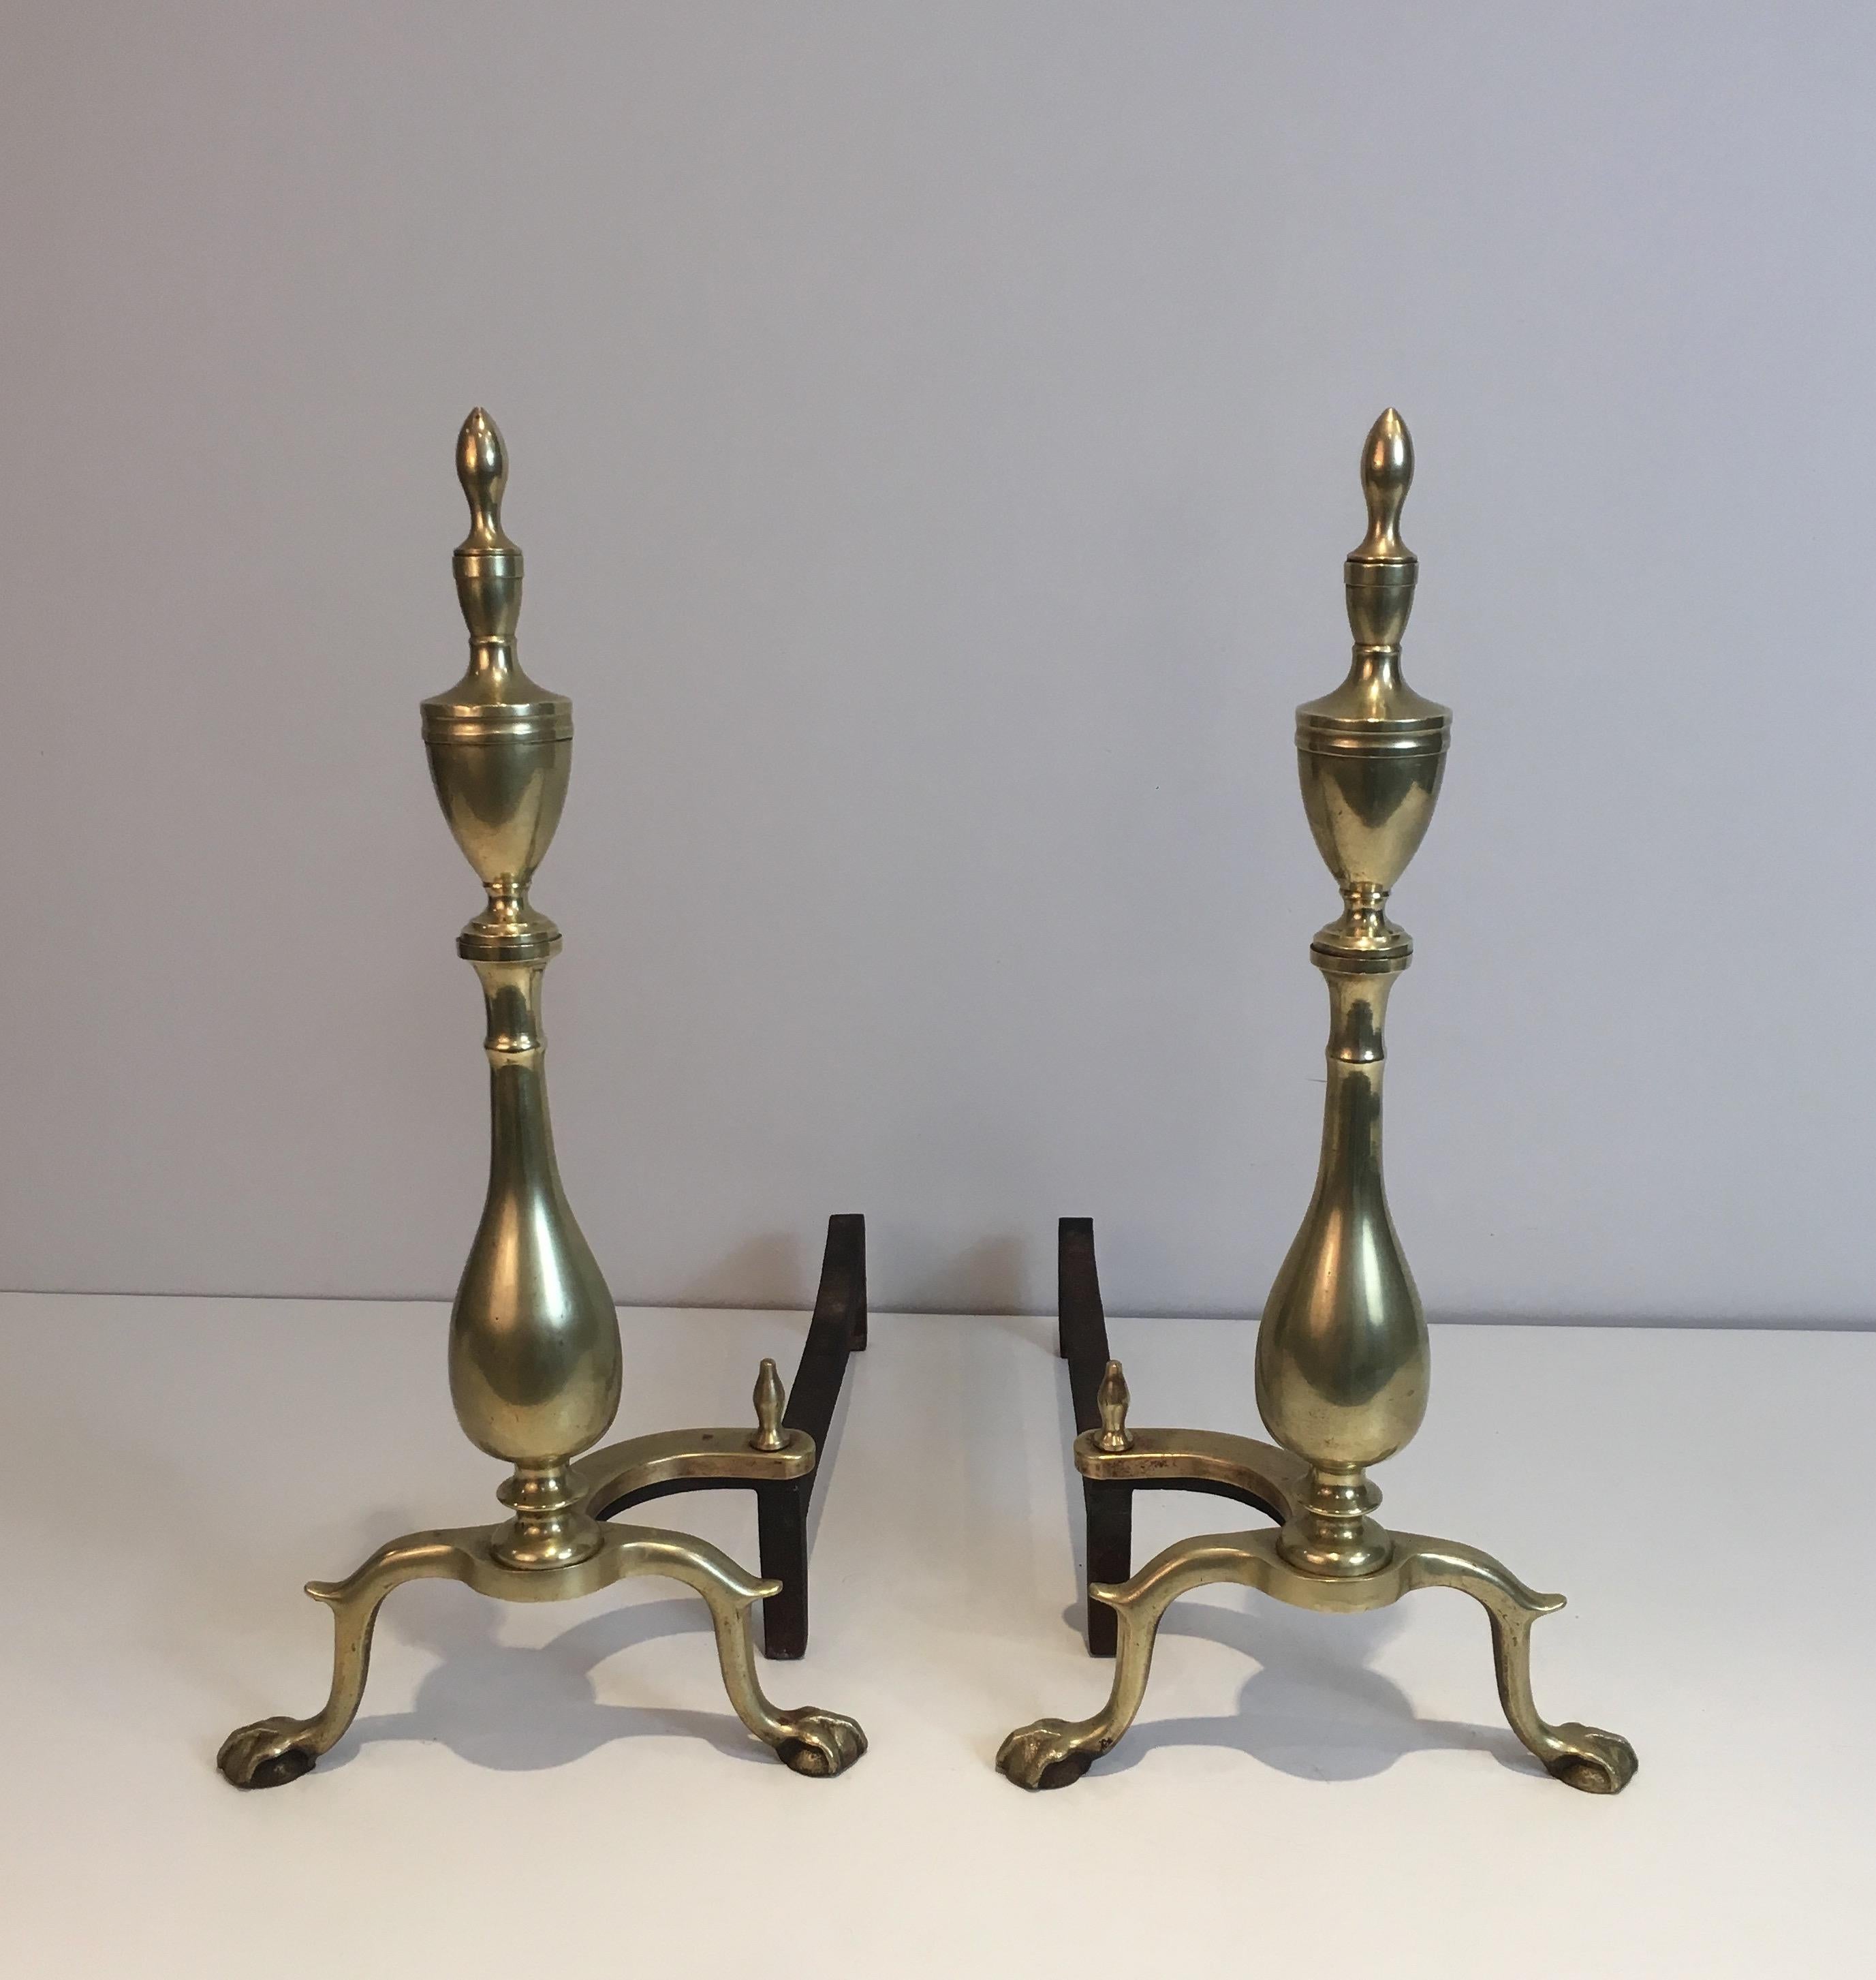 This pair of neo-gothic andirons are made of bronze and wrought Iron. This is a French work from 19th century.